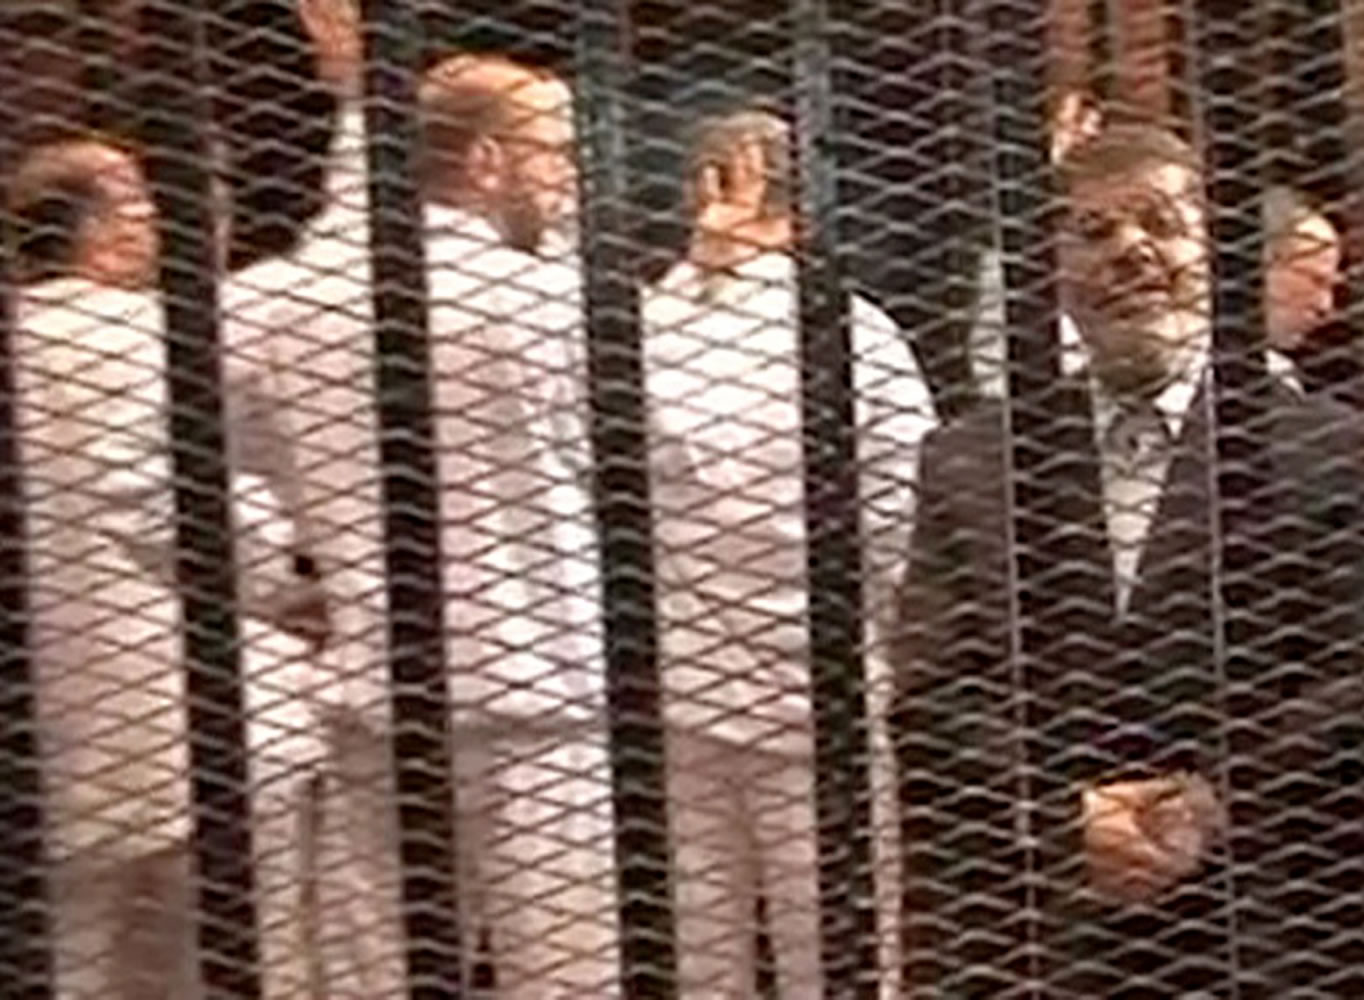 Ousted President Mohammed Morsi, right, speaking from the defendant's cage as he stands with co-defendants in a makeshift courtroom during a trial hearing in Cairo, Egypt in May.